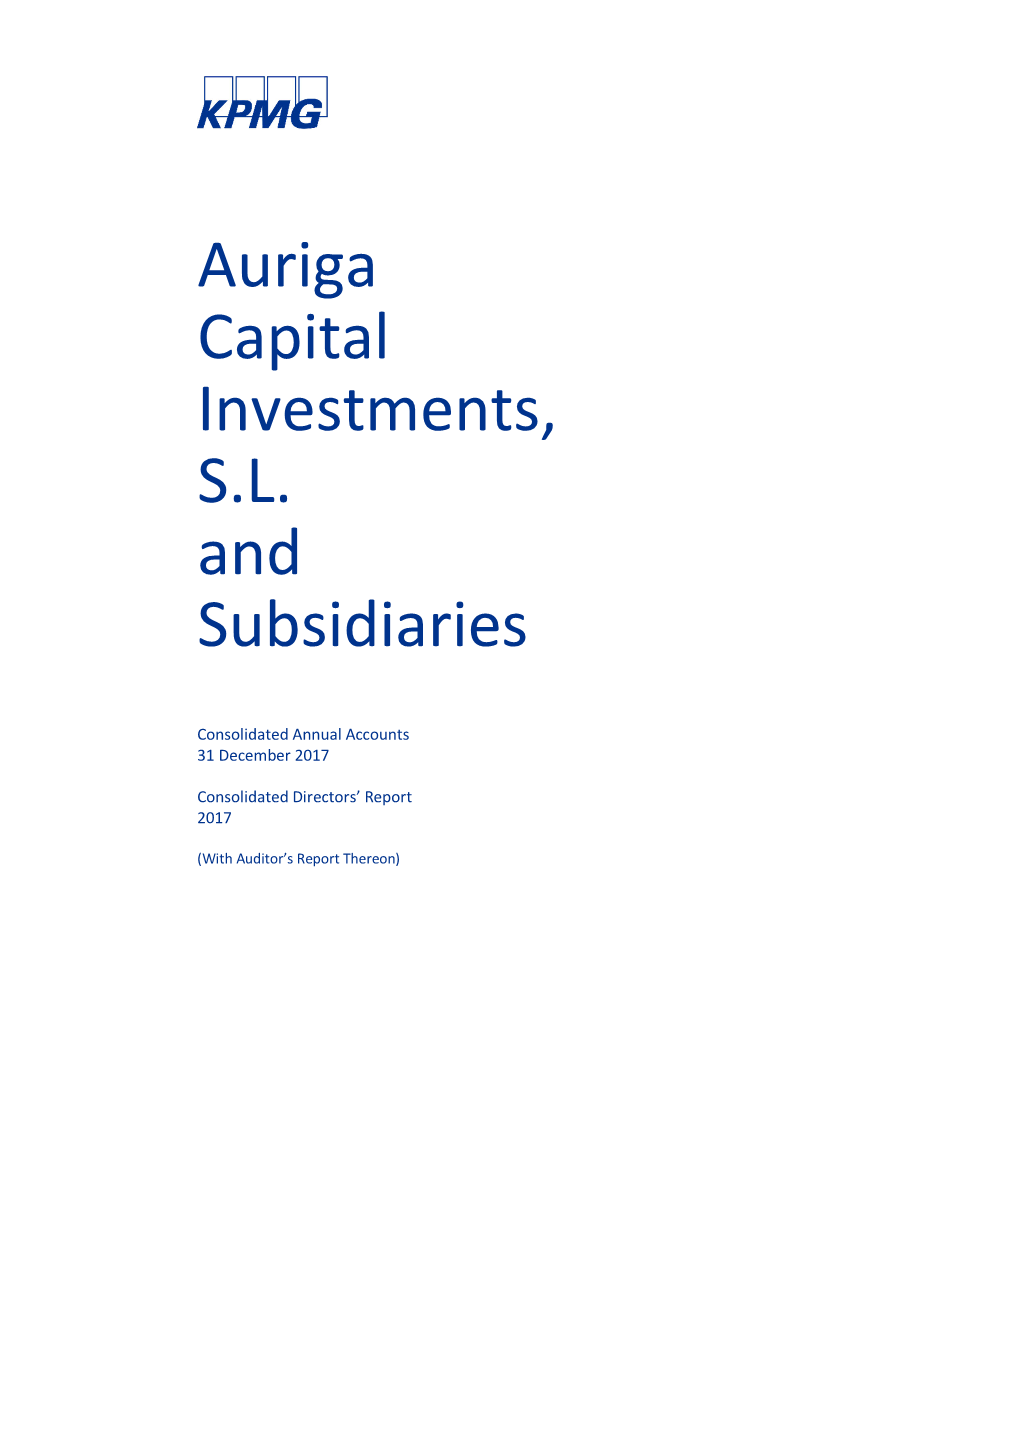 Auriga Capital Investments, S.L. and Subsidiaries